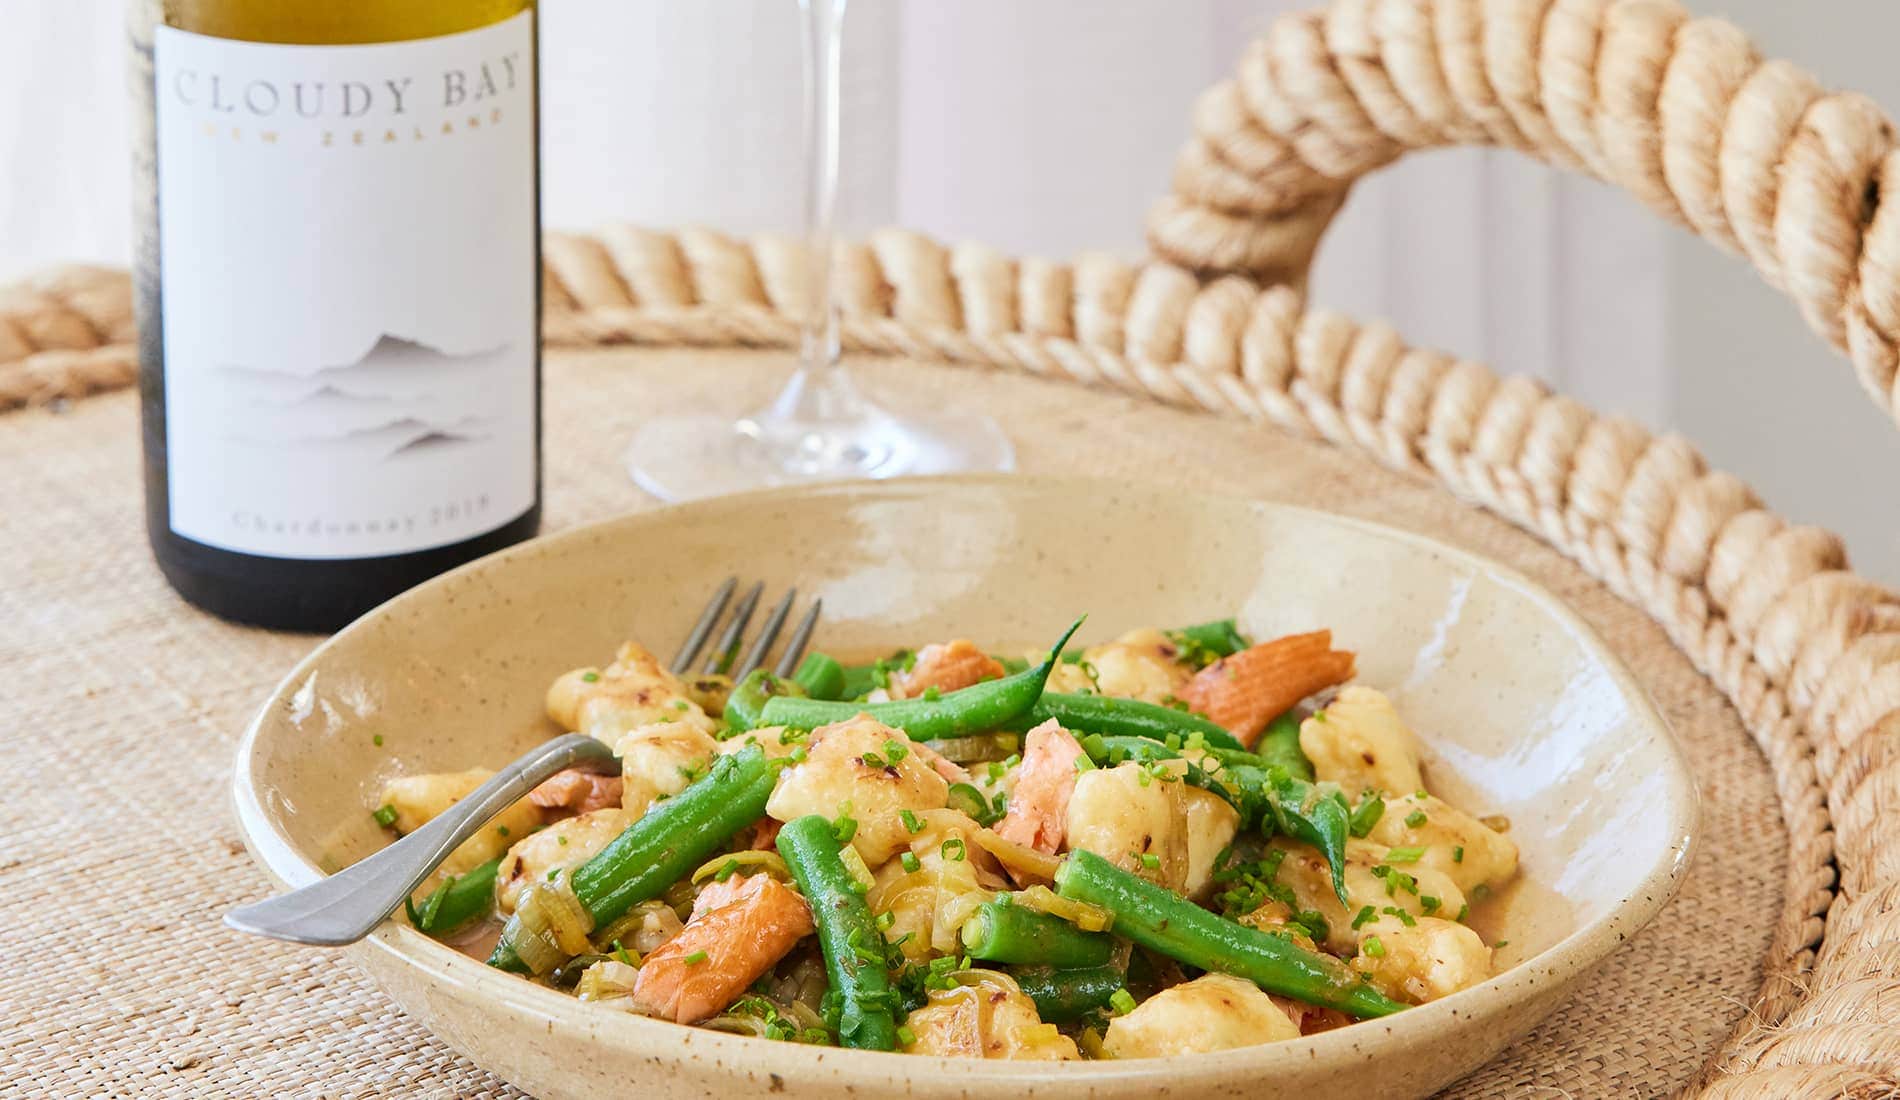 Bowl of food beside bottle and glass of Cloudy Bay Chardonnay